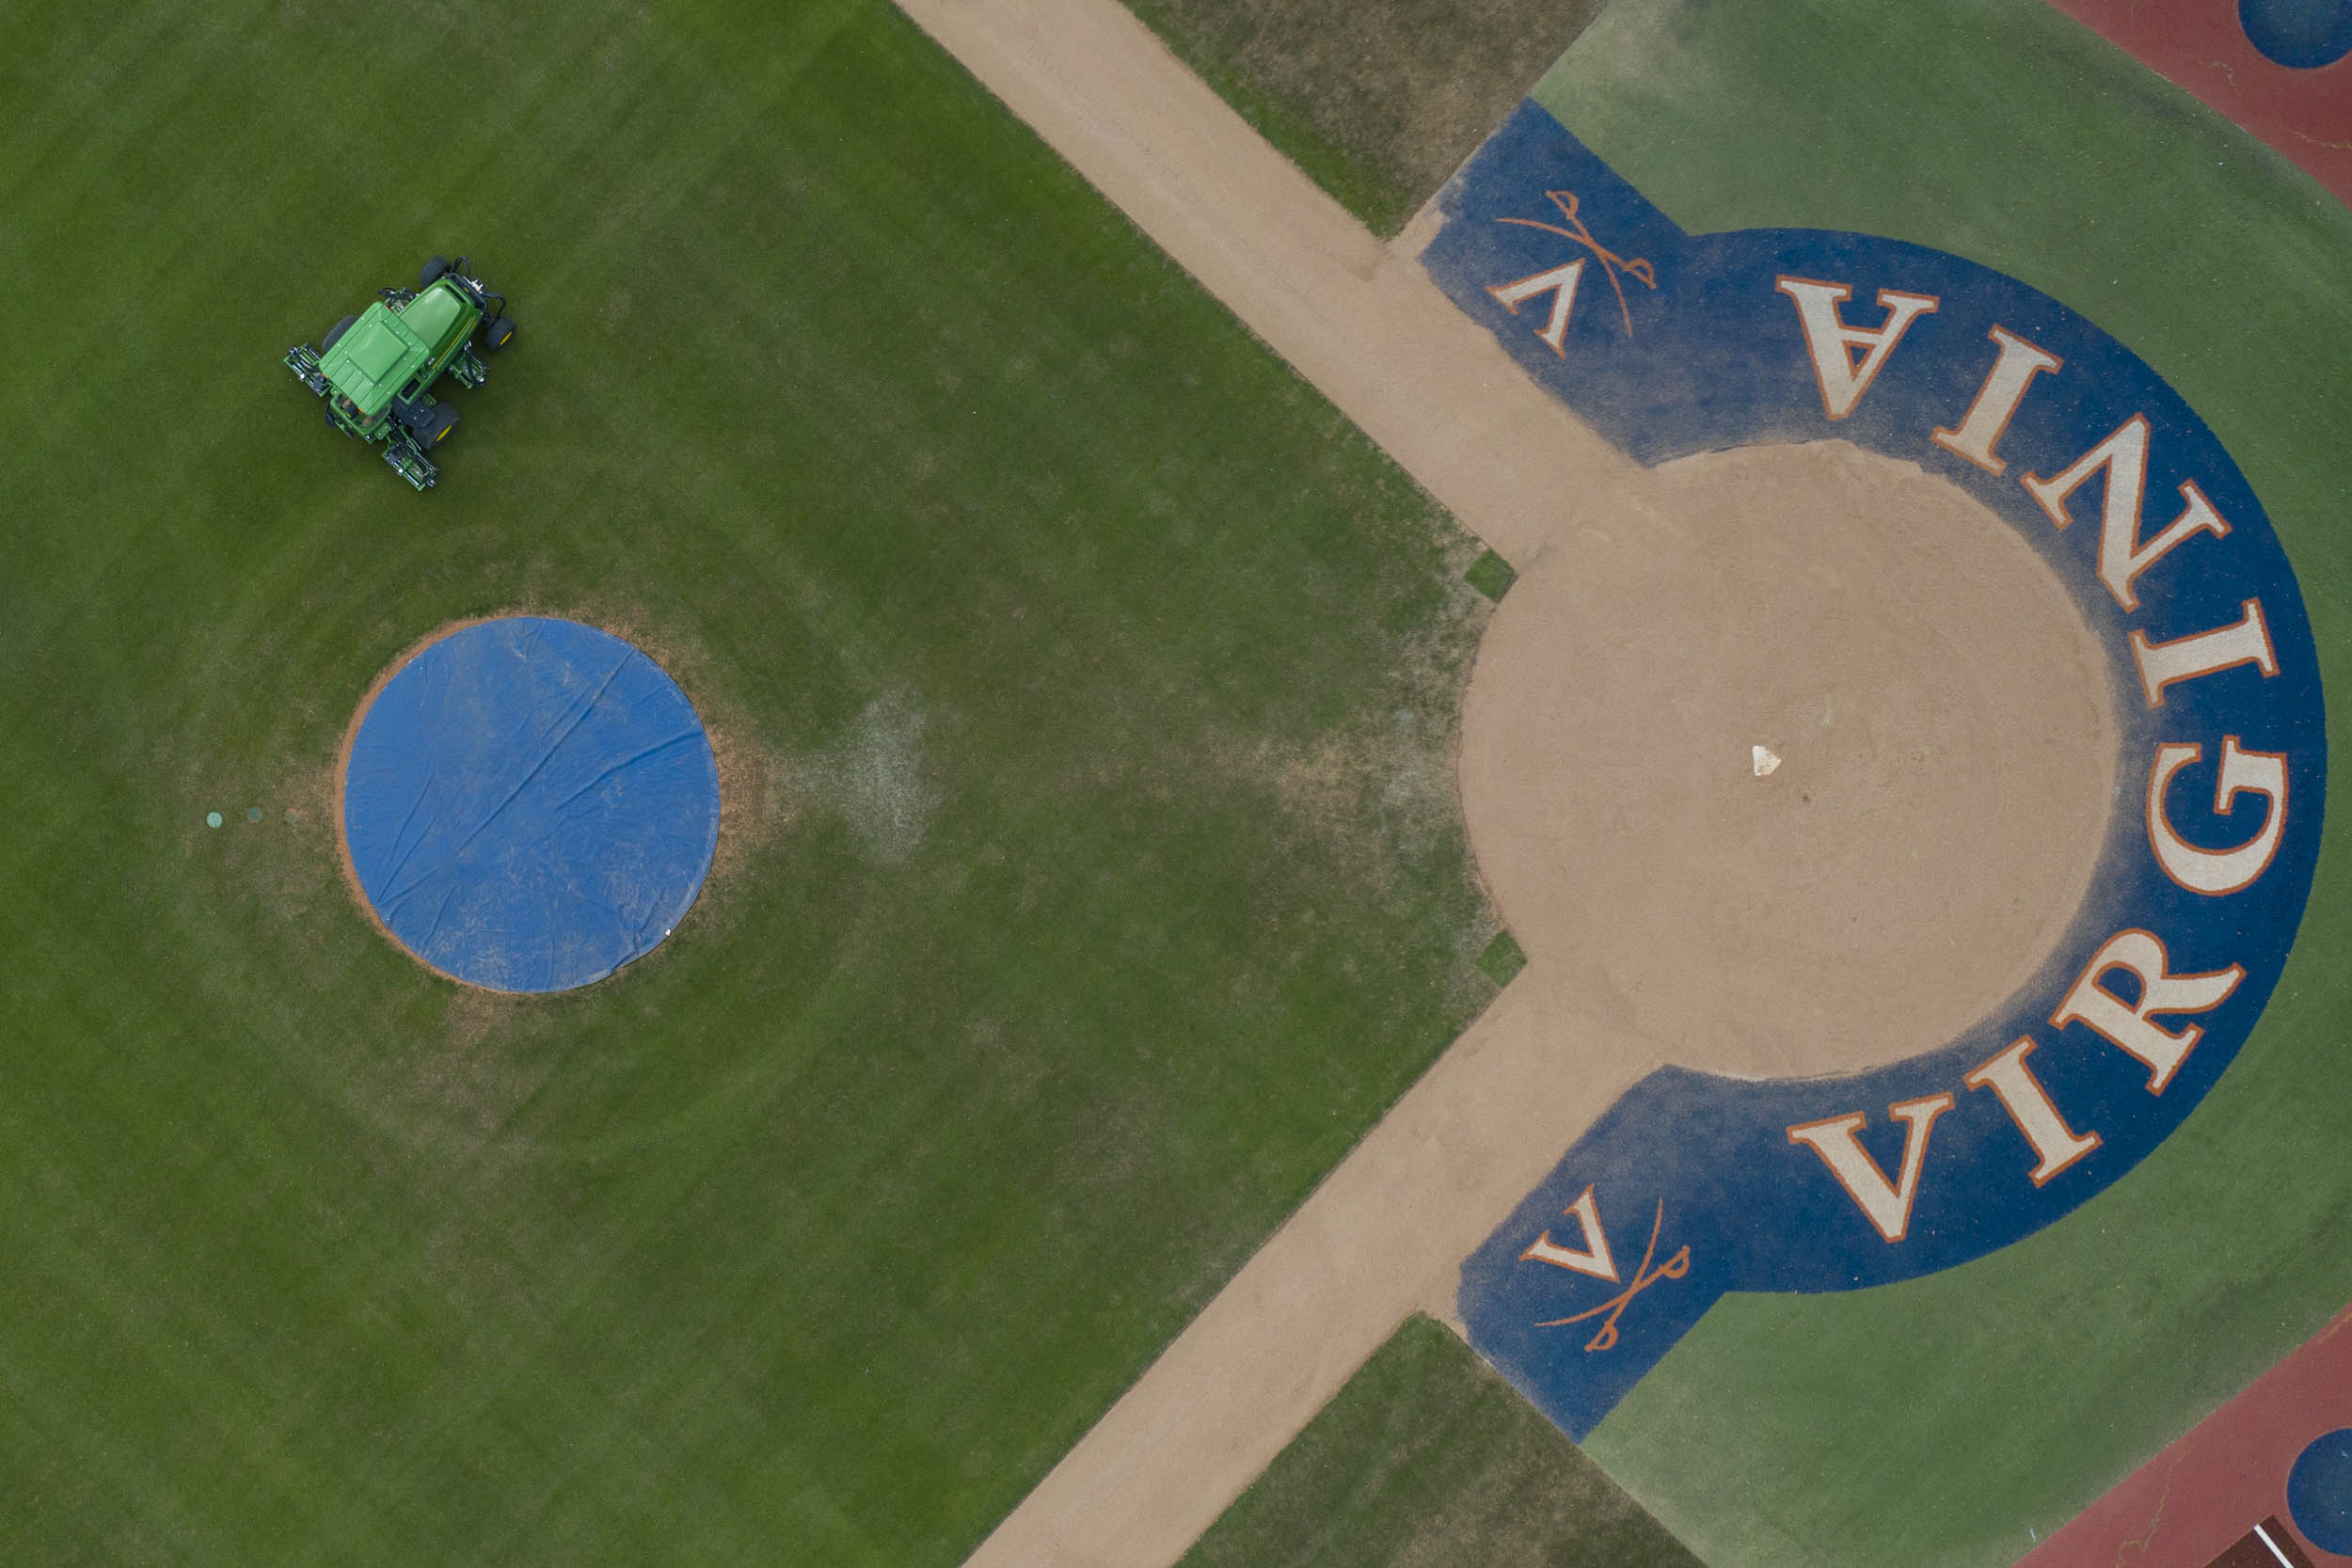 Aerial view of a mower mowing the baseball field